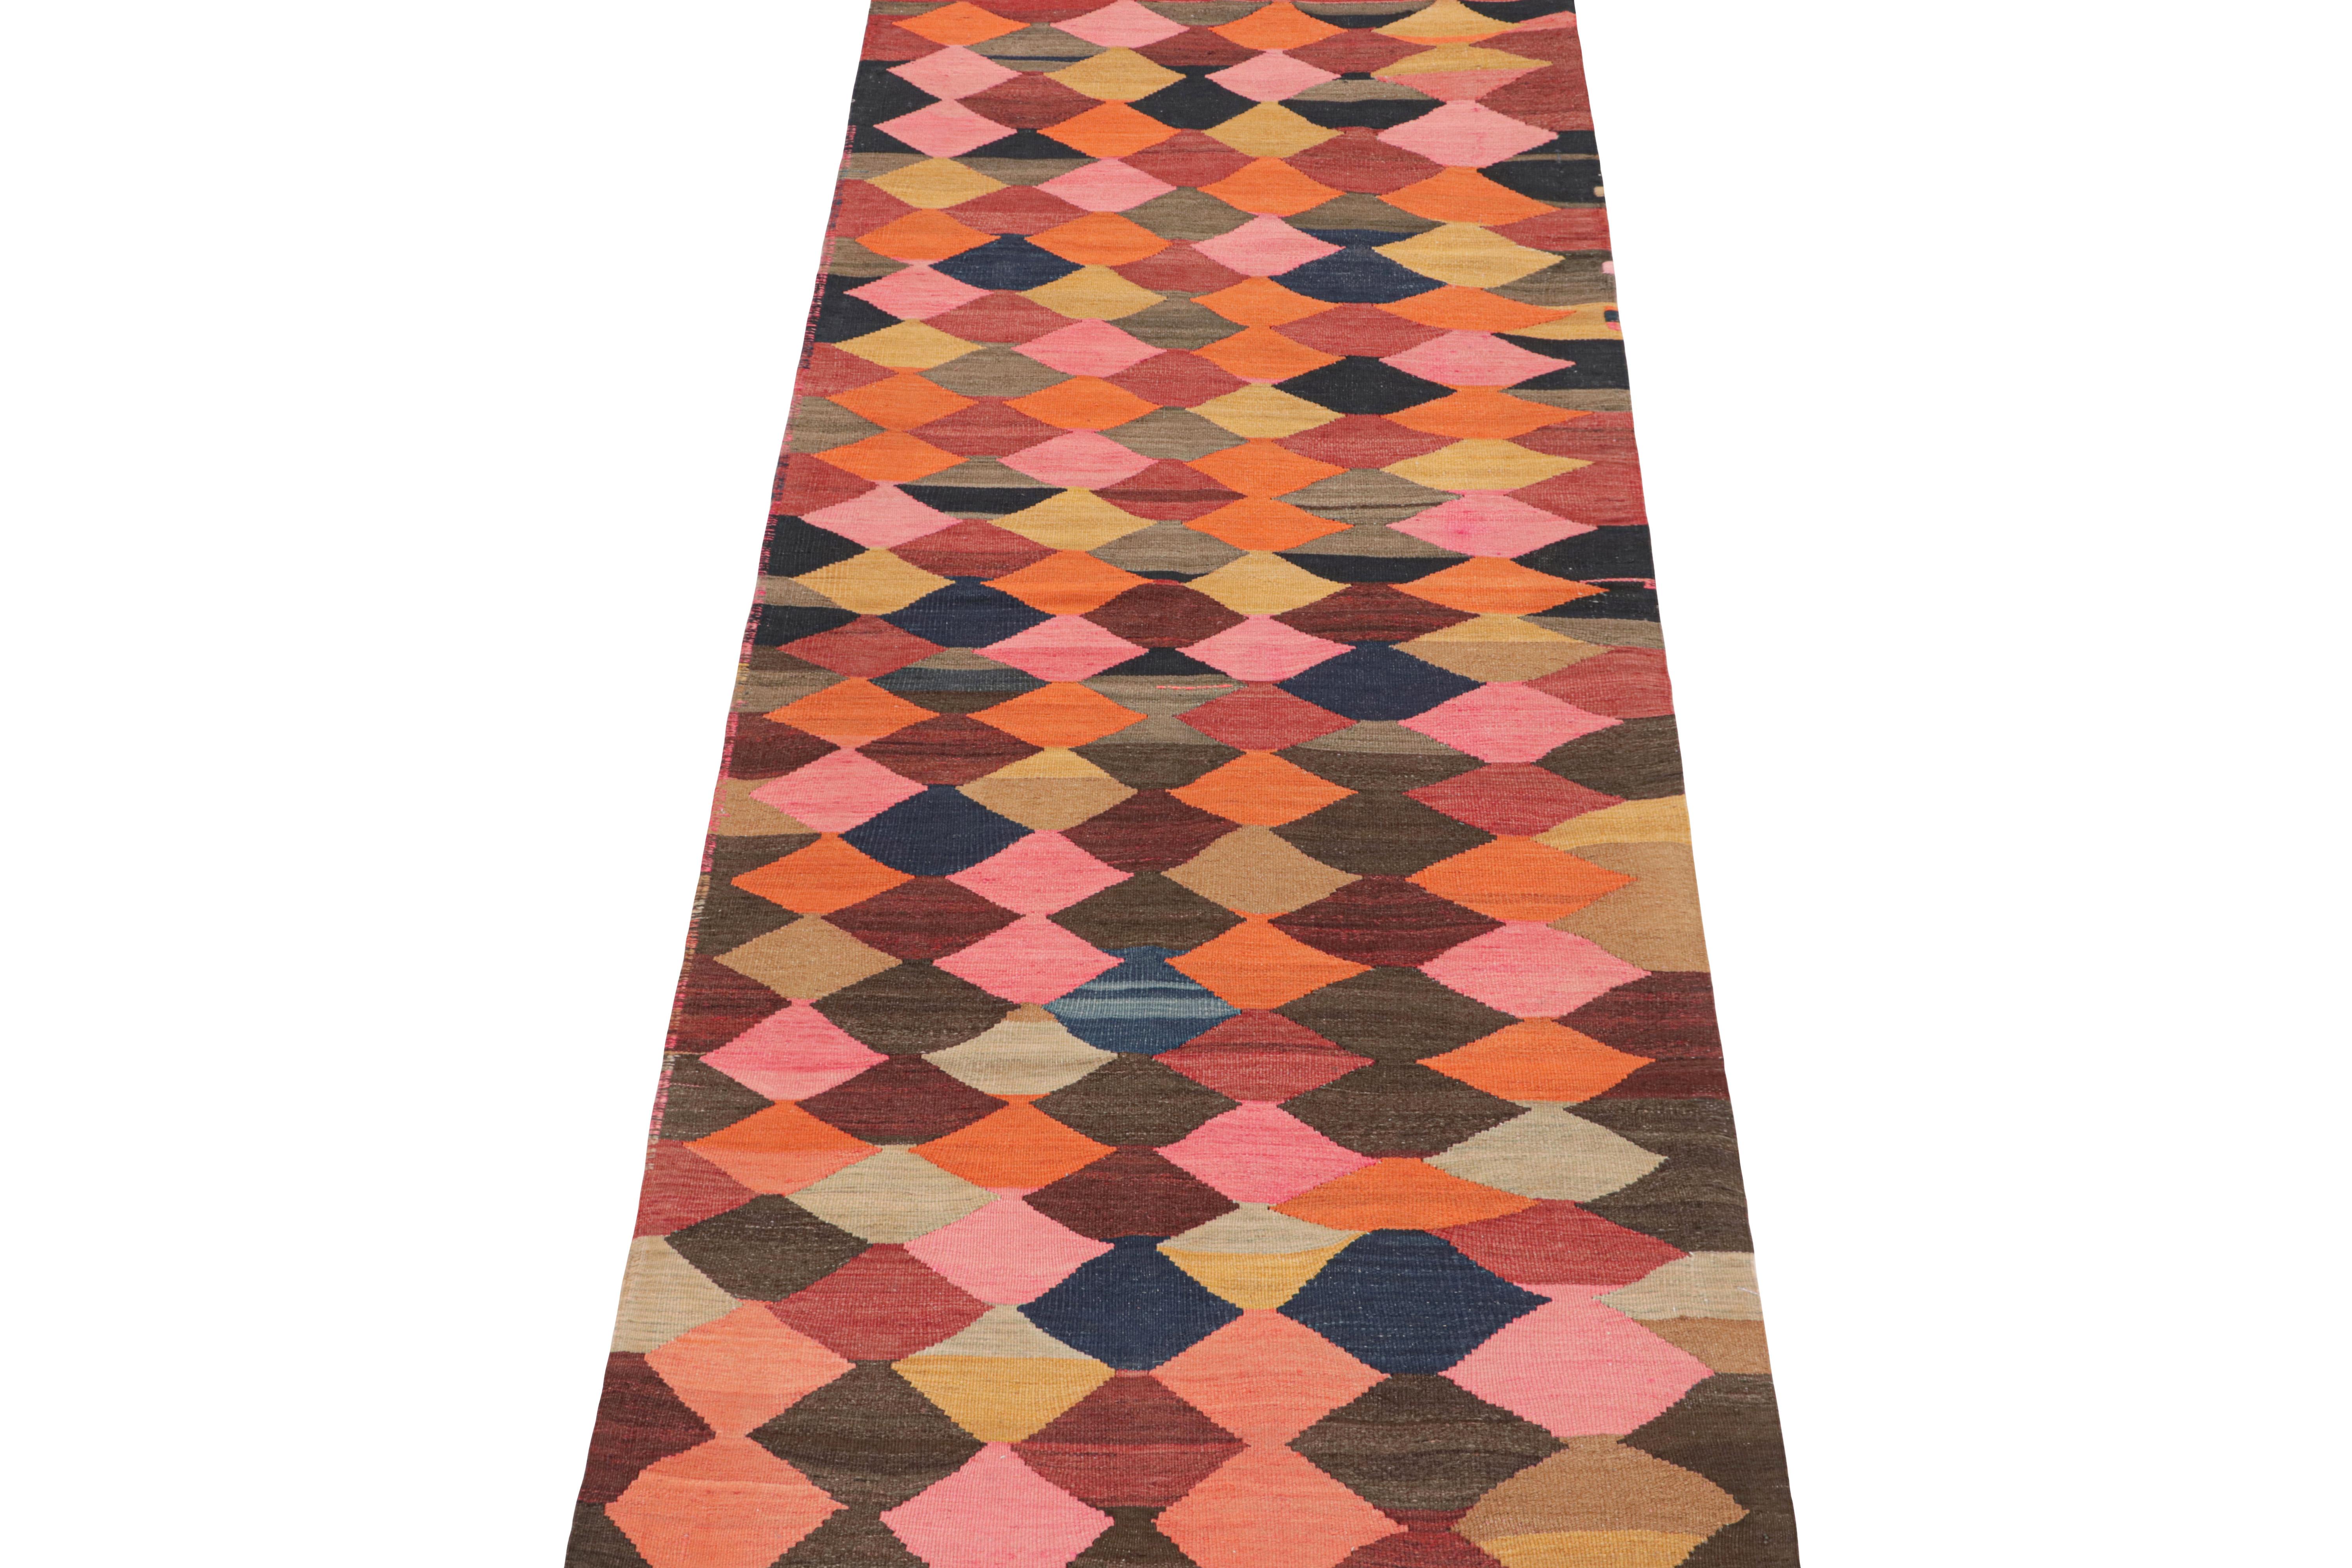 This vintage 4x10 Persian Kilim is believed to be a tribal runner of Karadagh—a mountainous region known for its craft. Handwoven in wool, it originates circa 1950-1960.

Design:

The bold design prefers geometric patterns in polychromatic